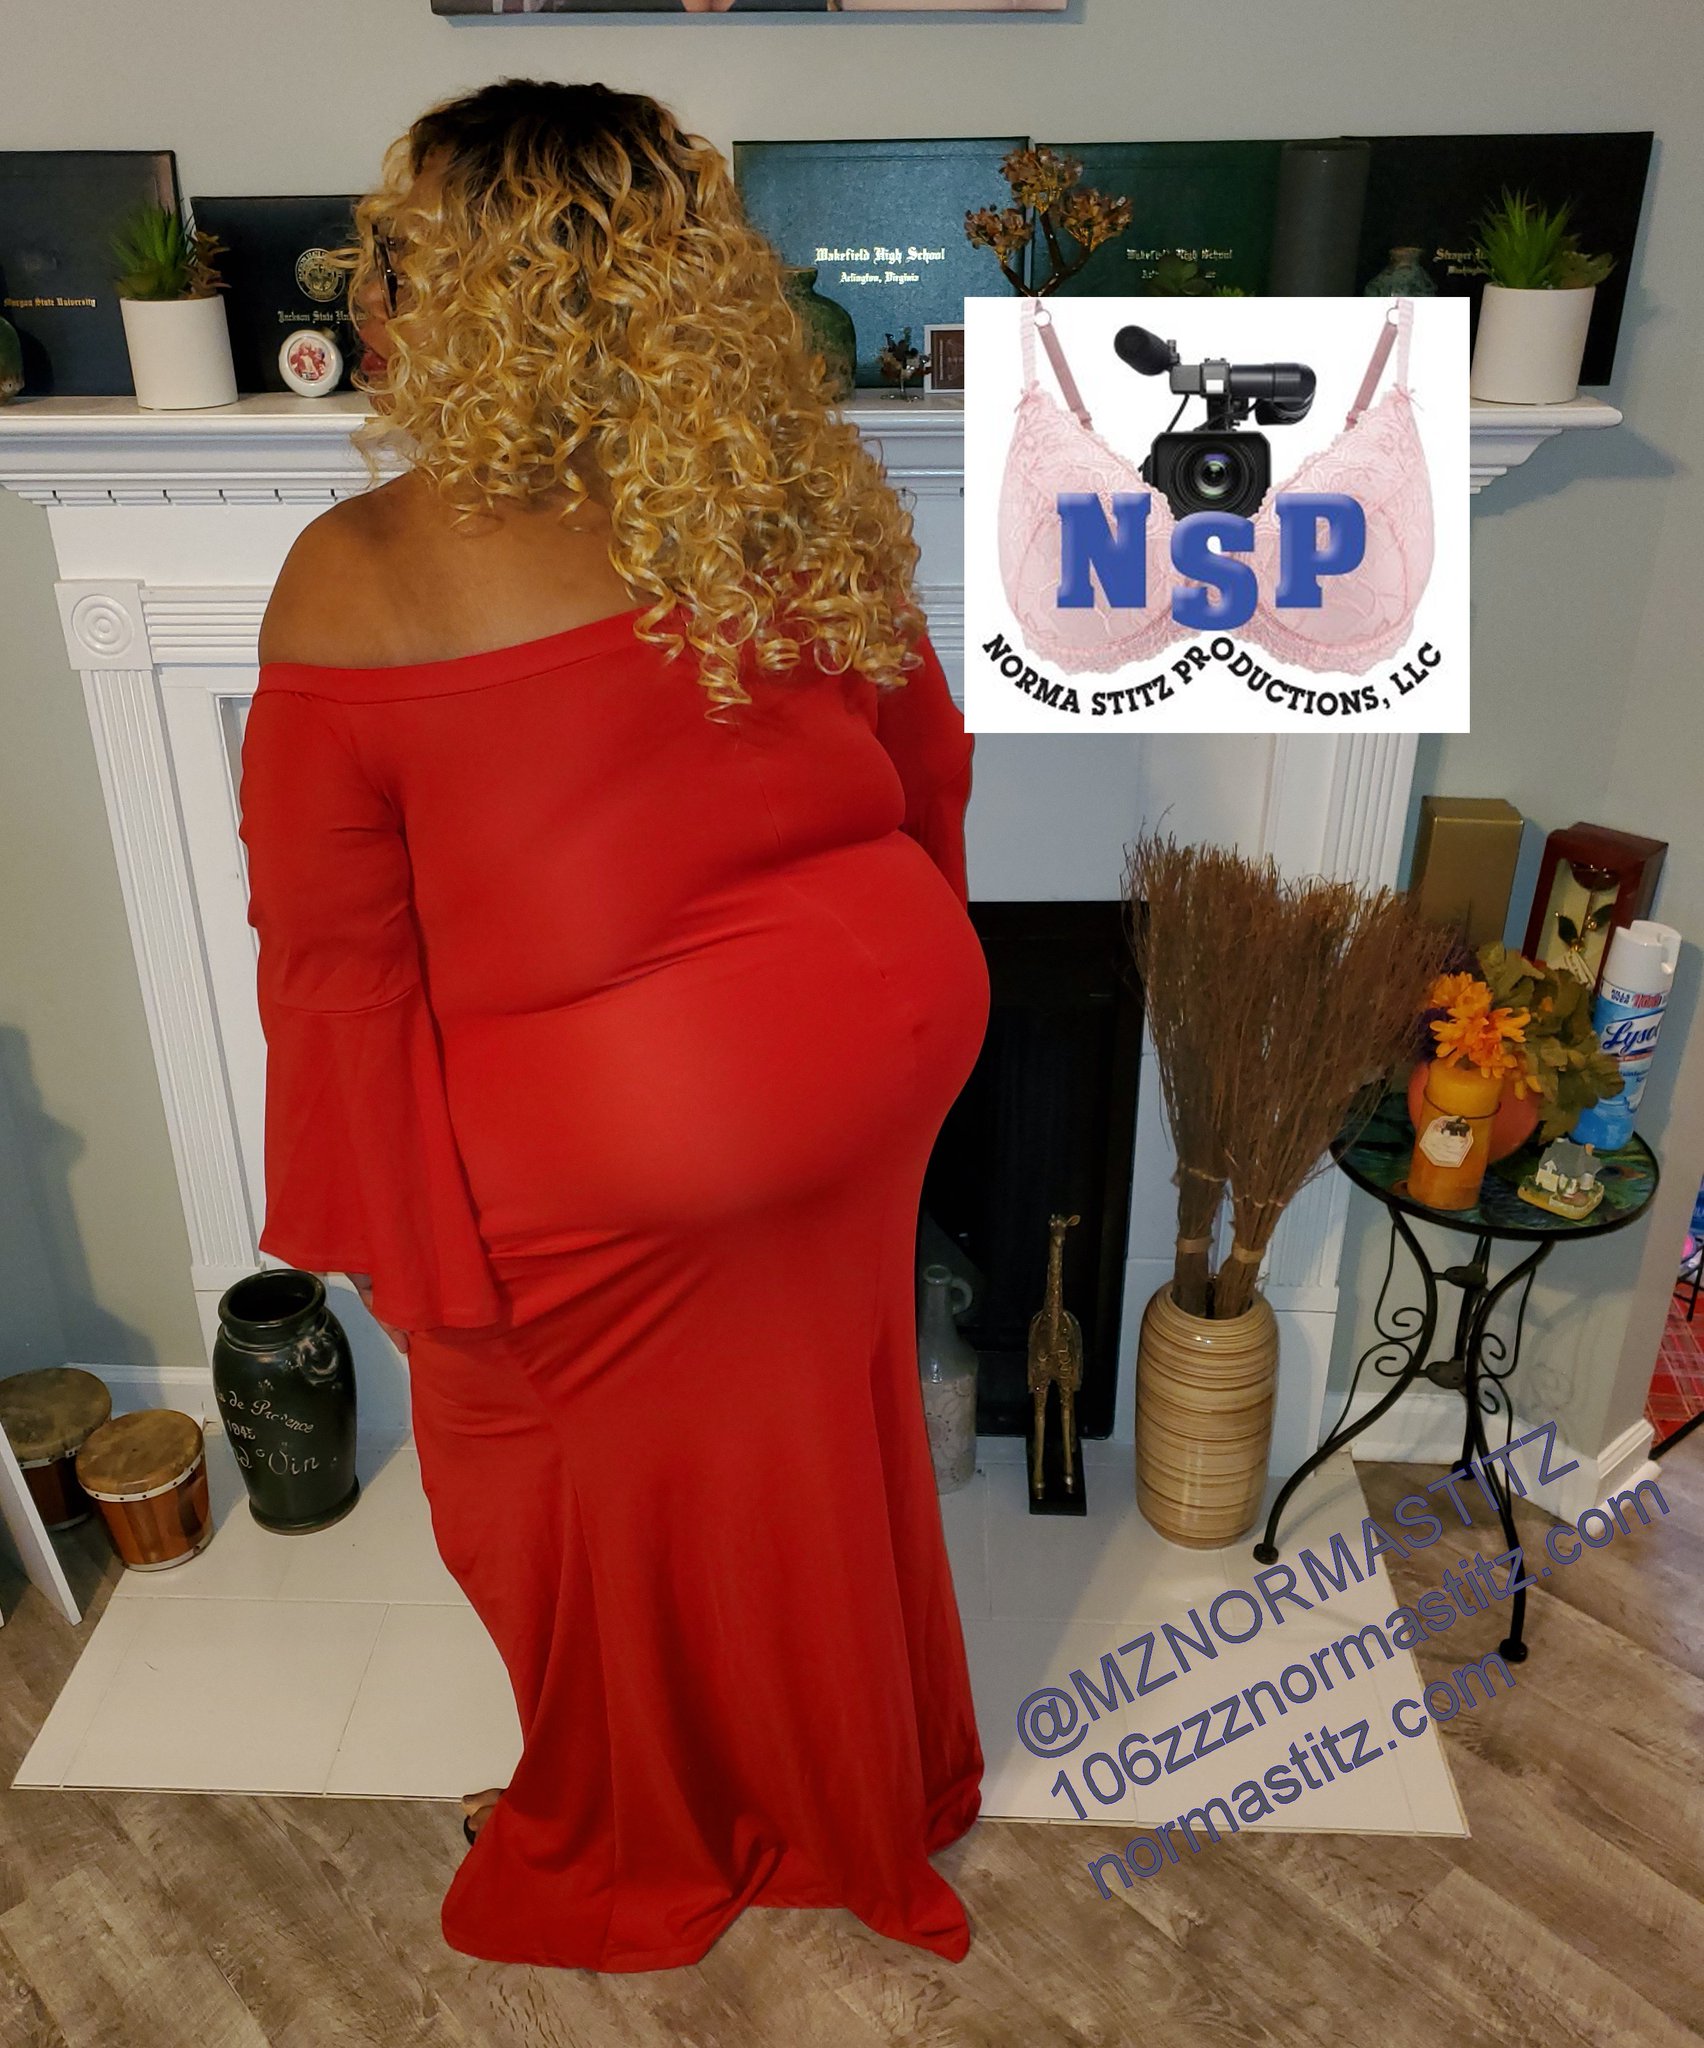 Mz Norma Stitz On Twitter Thank For This Lovely Red Dress Off My 